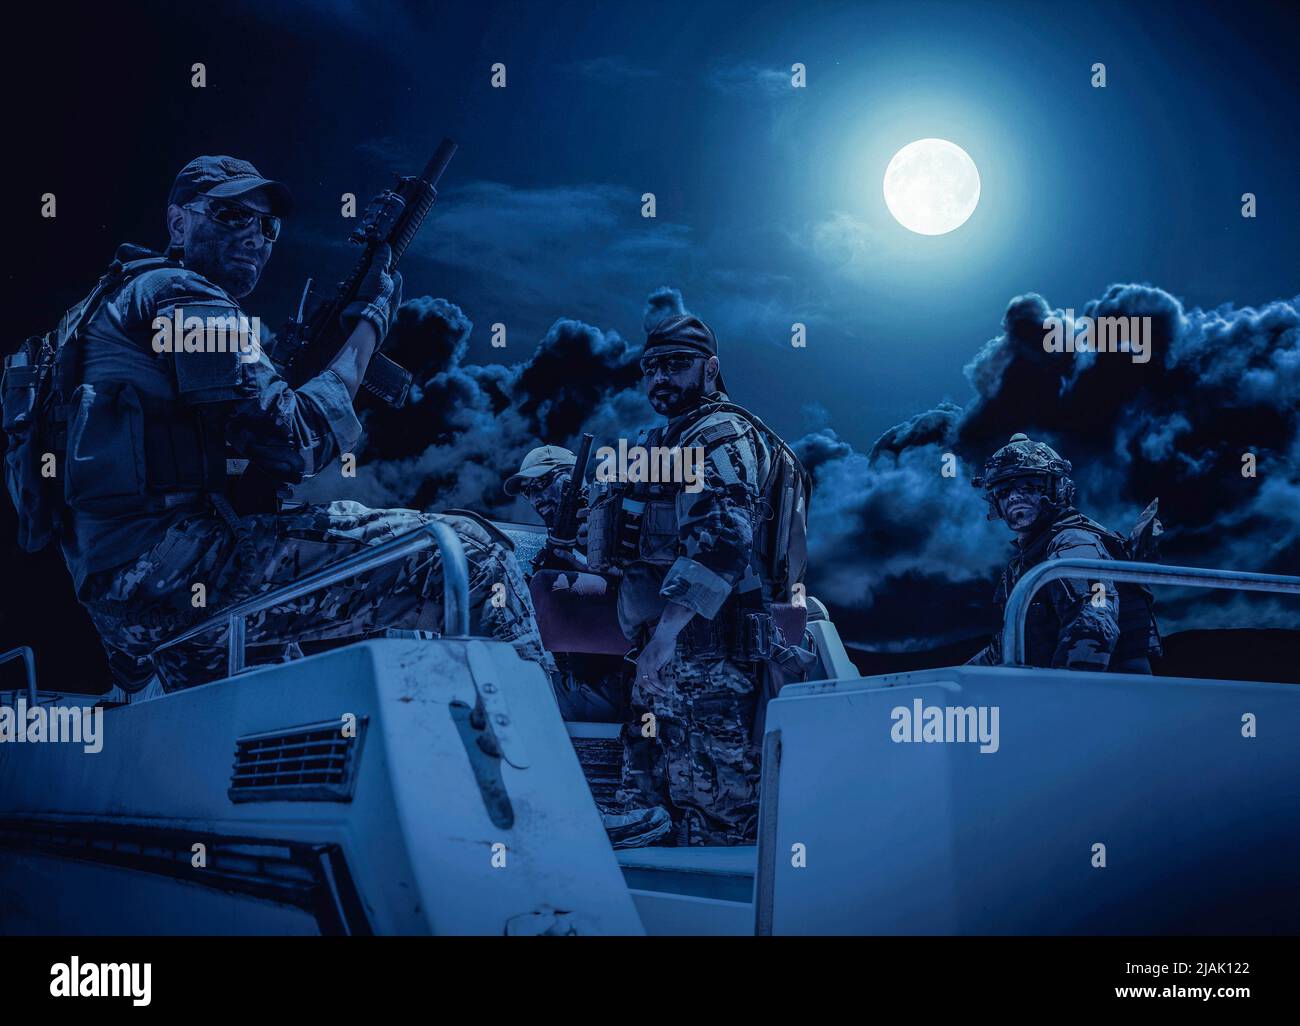 Navy SEALs on a speed boat under a full moon, during a night patrol mission. Stock Photo